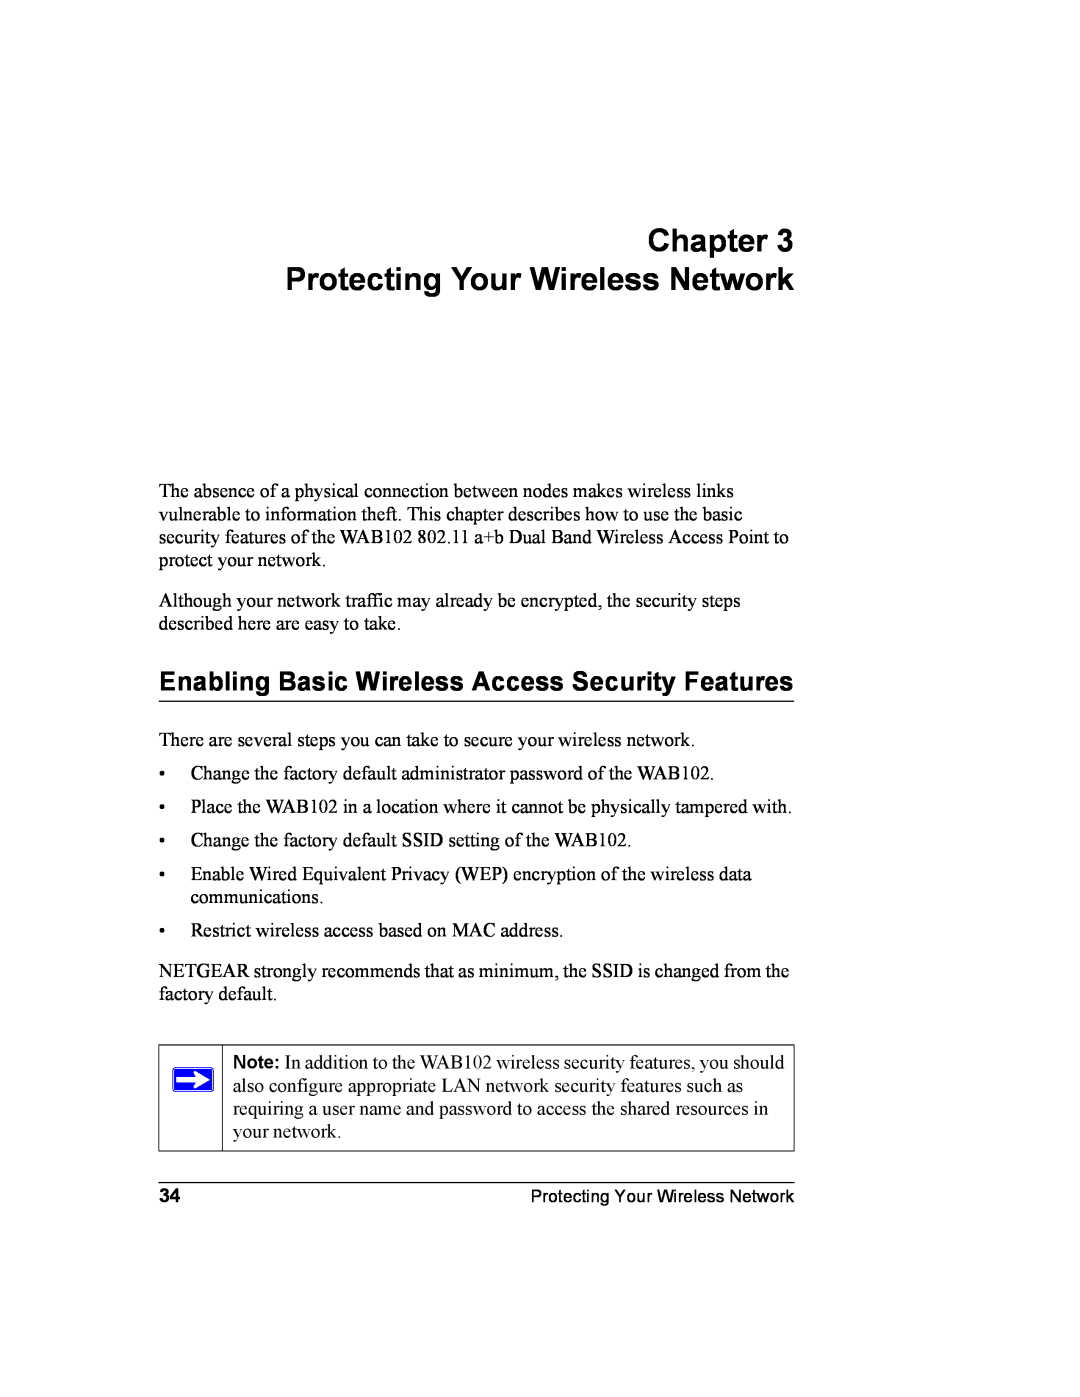 NETGEAR WAB102 manual Protecting Your Wireless Network, Enabling Basic Wireless Access Security Features 